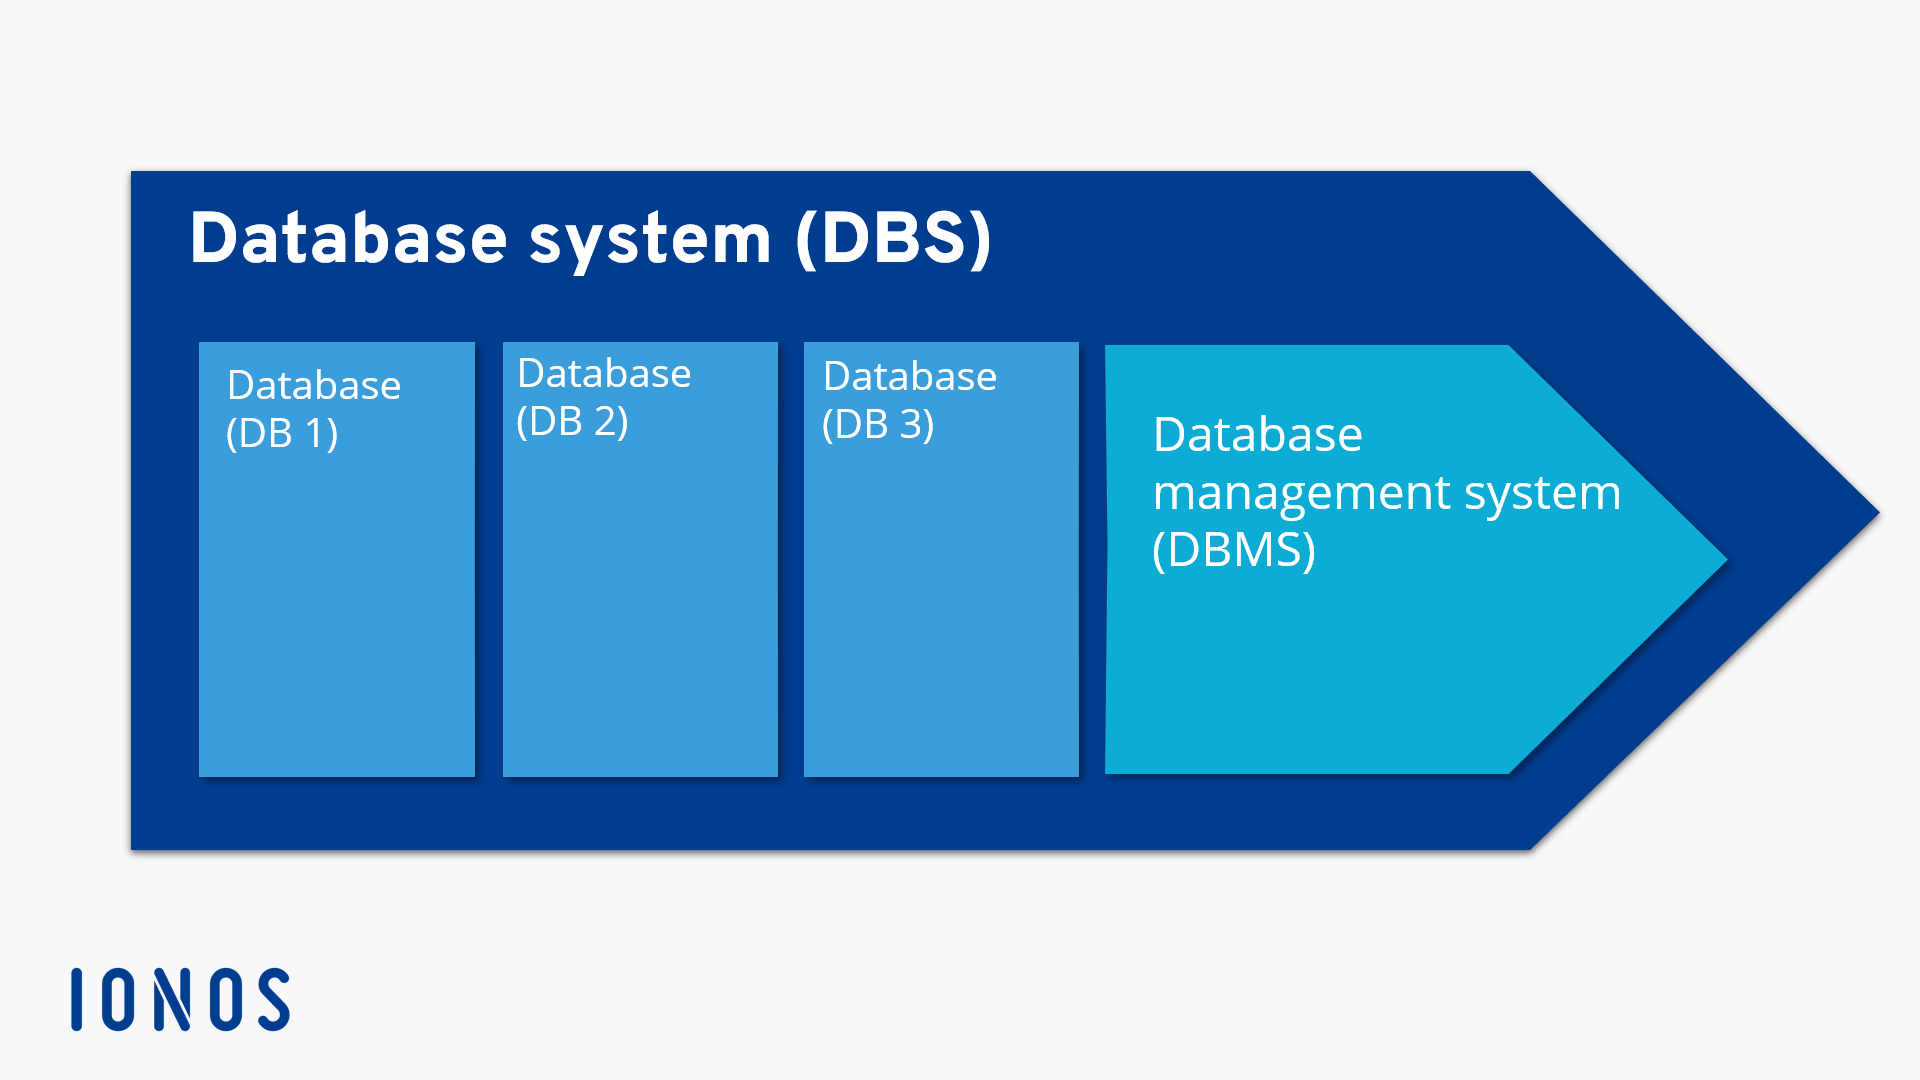 Graphical depiction of a database system (DBS) with three databases